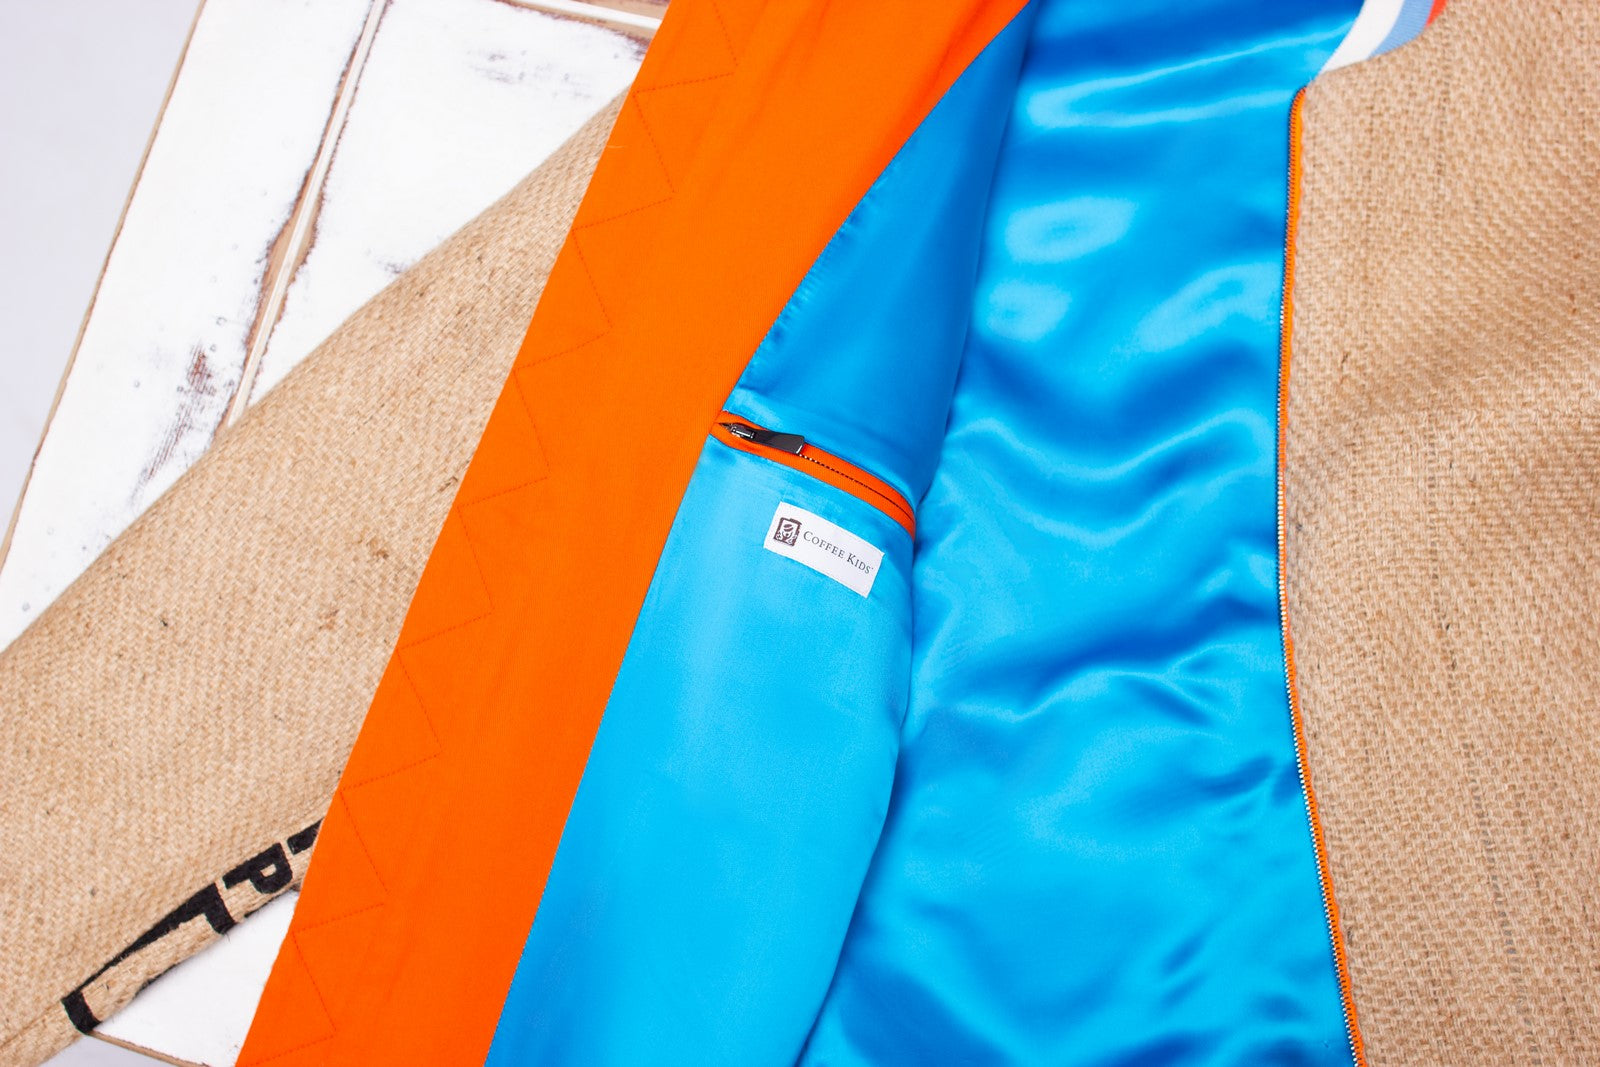 Colourful inner workings in sky blue and sunny orange of an exquisite jacket from coffee sacks